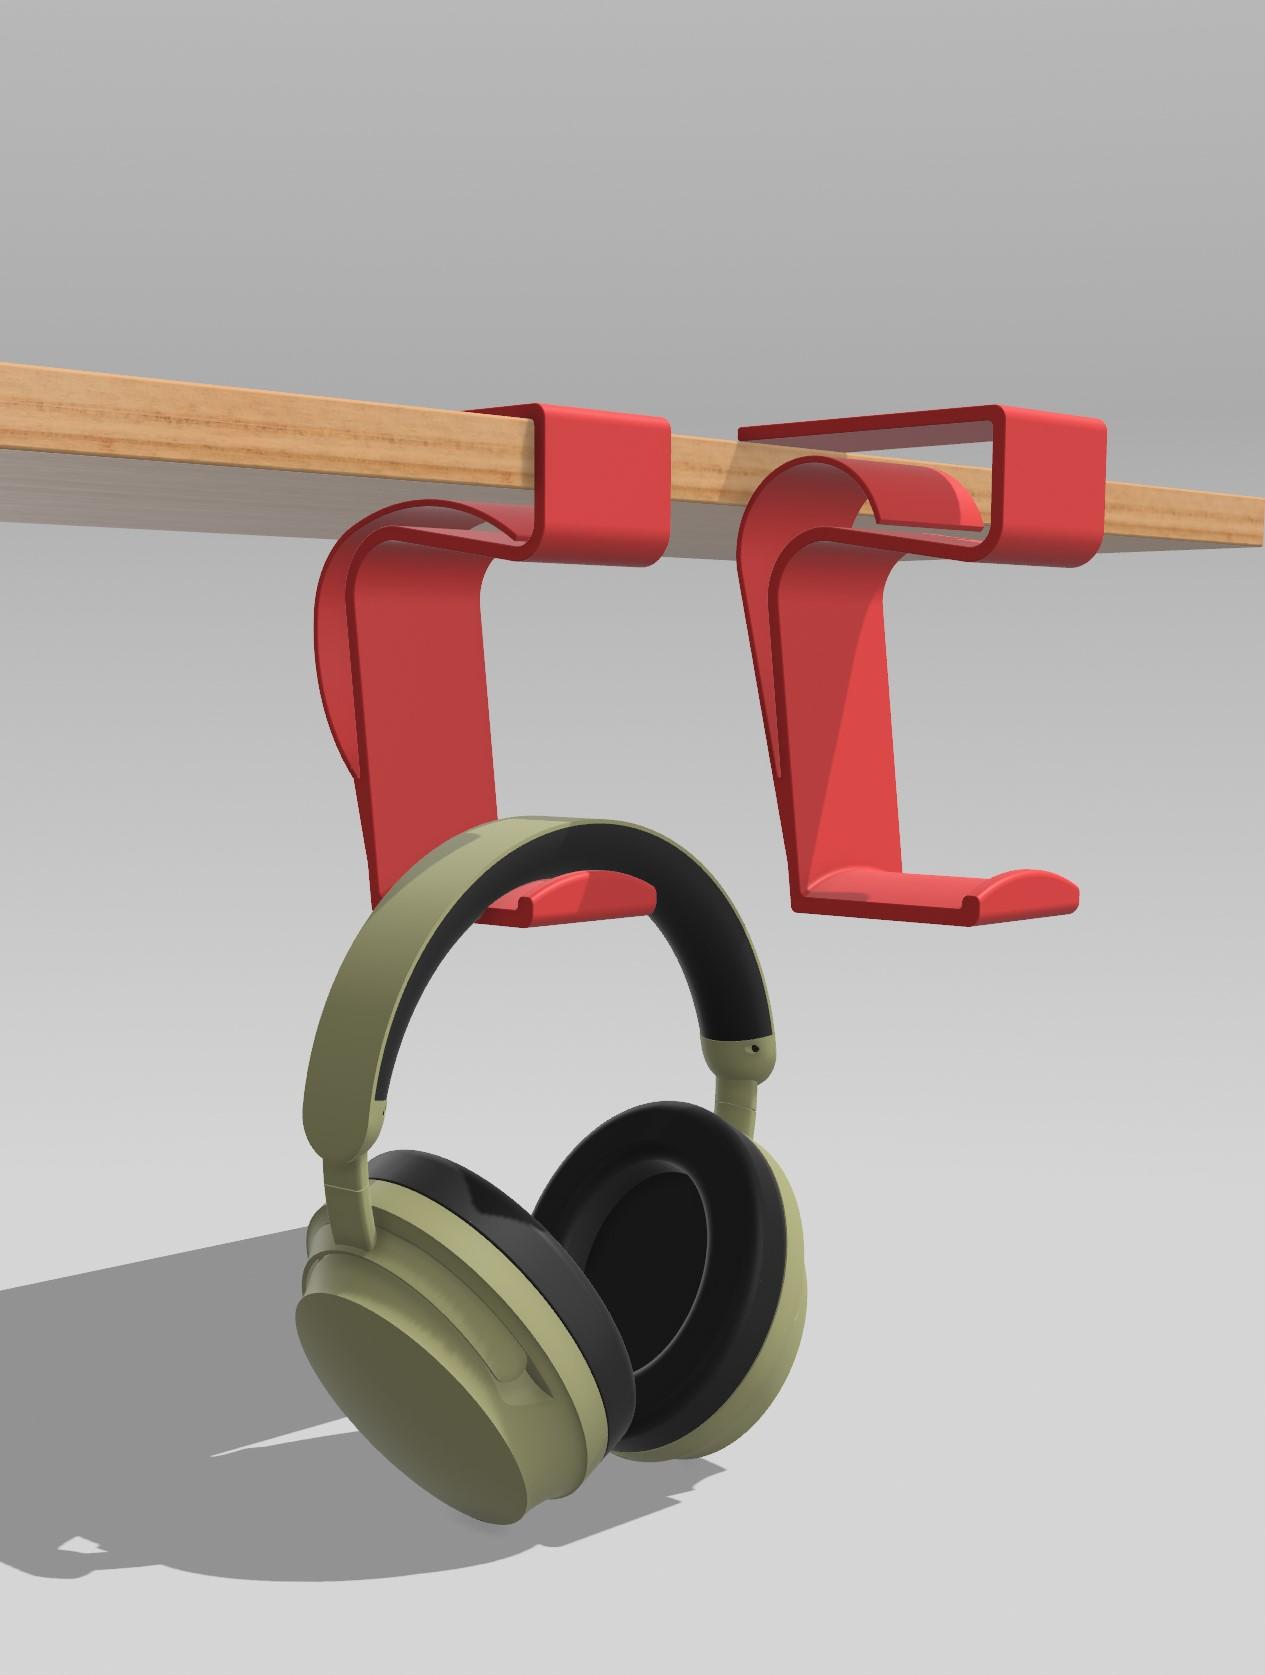 Headphone stand for a desk or shelf 3d model